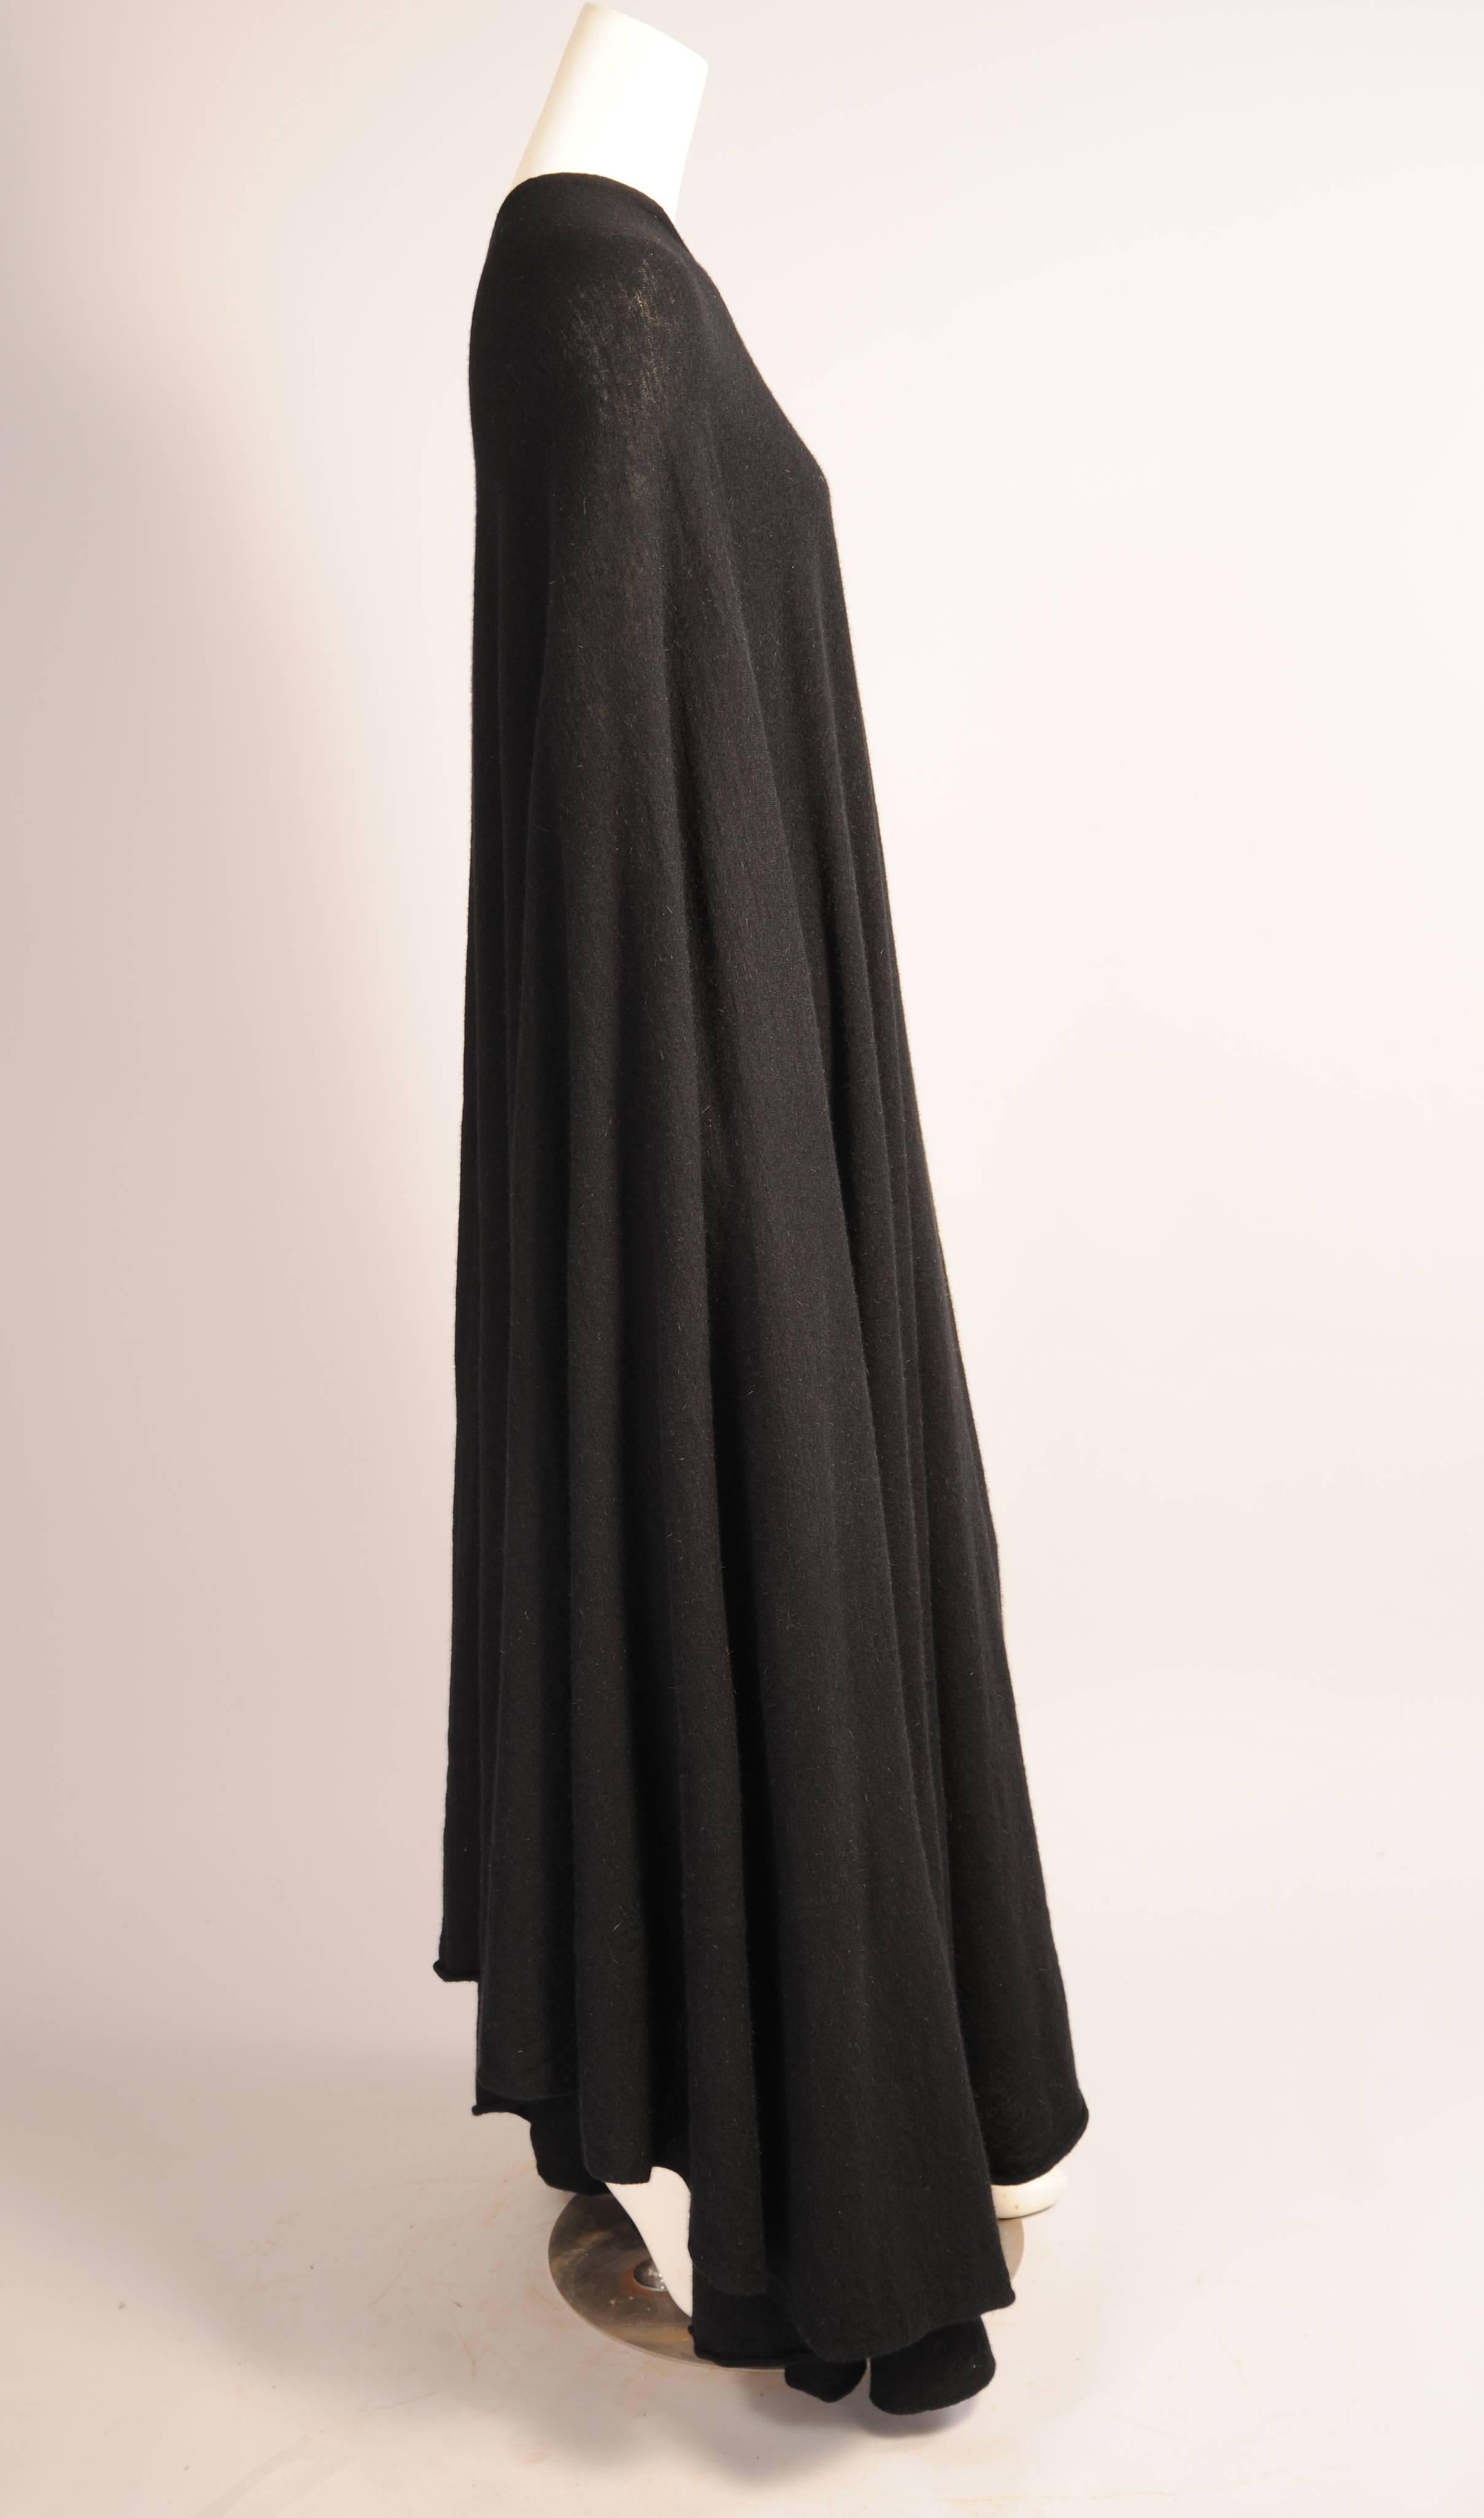 Women's or Men's Madame Gres Haute Couture Black Angora and Wool Blend Evening Cape Book Piece